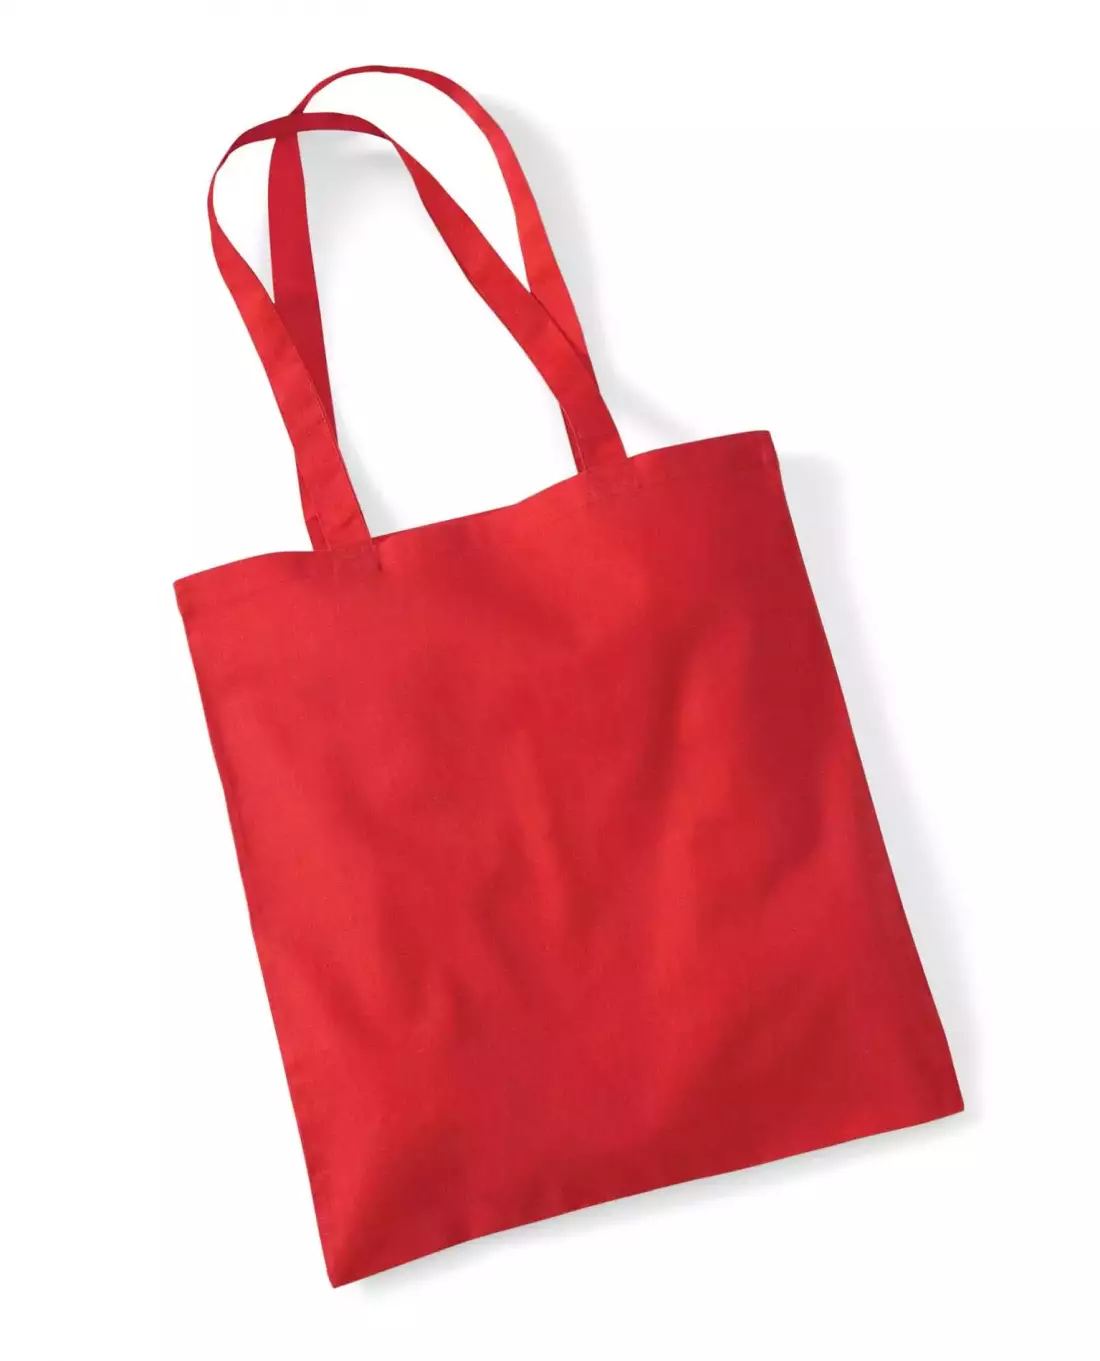 BAG FOR LIFE PUUVILLAKASSI 10 L, Bright Red